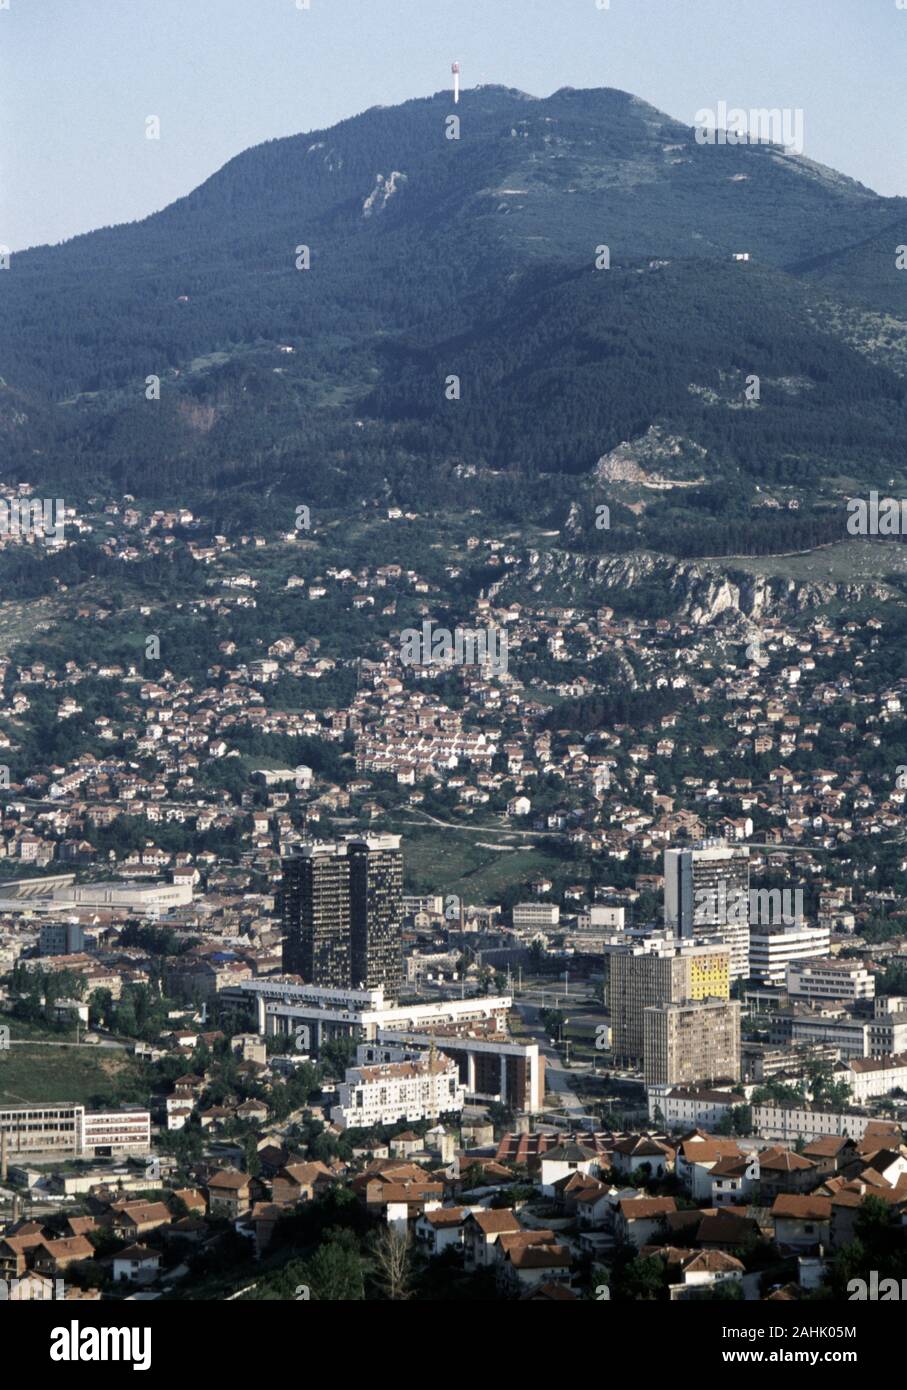 15th August 1993 During the Siege of Sarajevo: the view of the city and Mount Trebevic from Hum Hill towards the south-east. Stock Photo